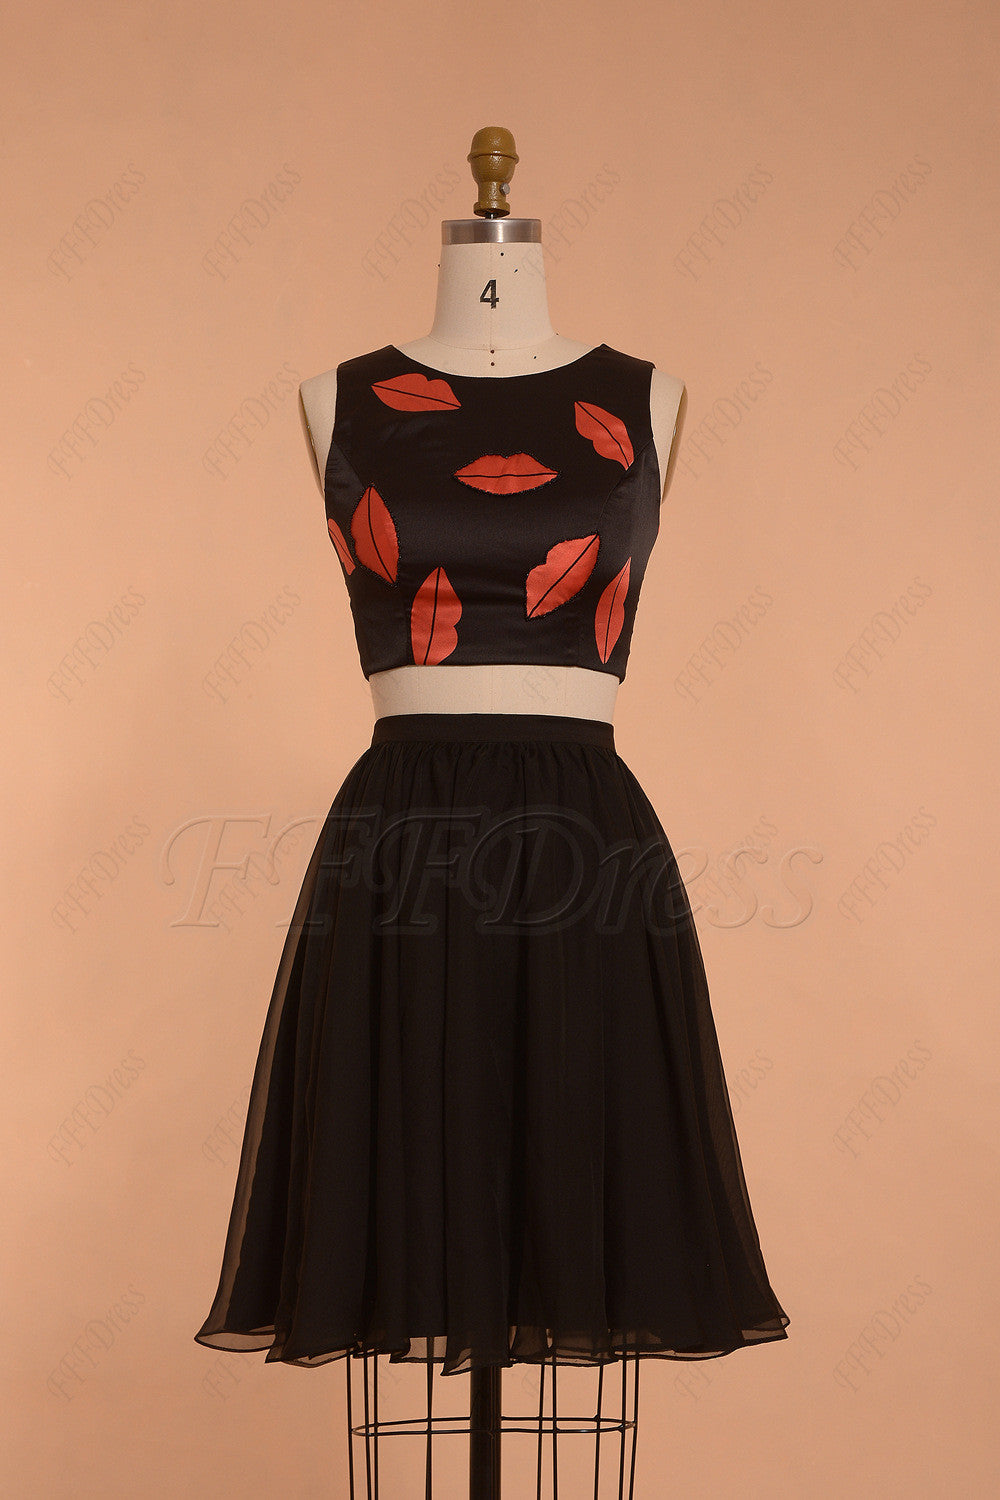 Lips printed black two piece prom dresses short